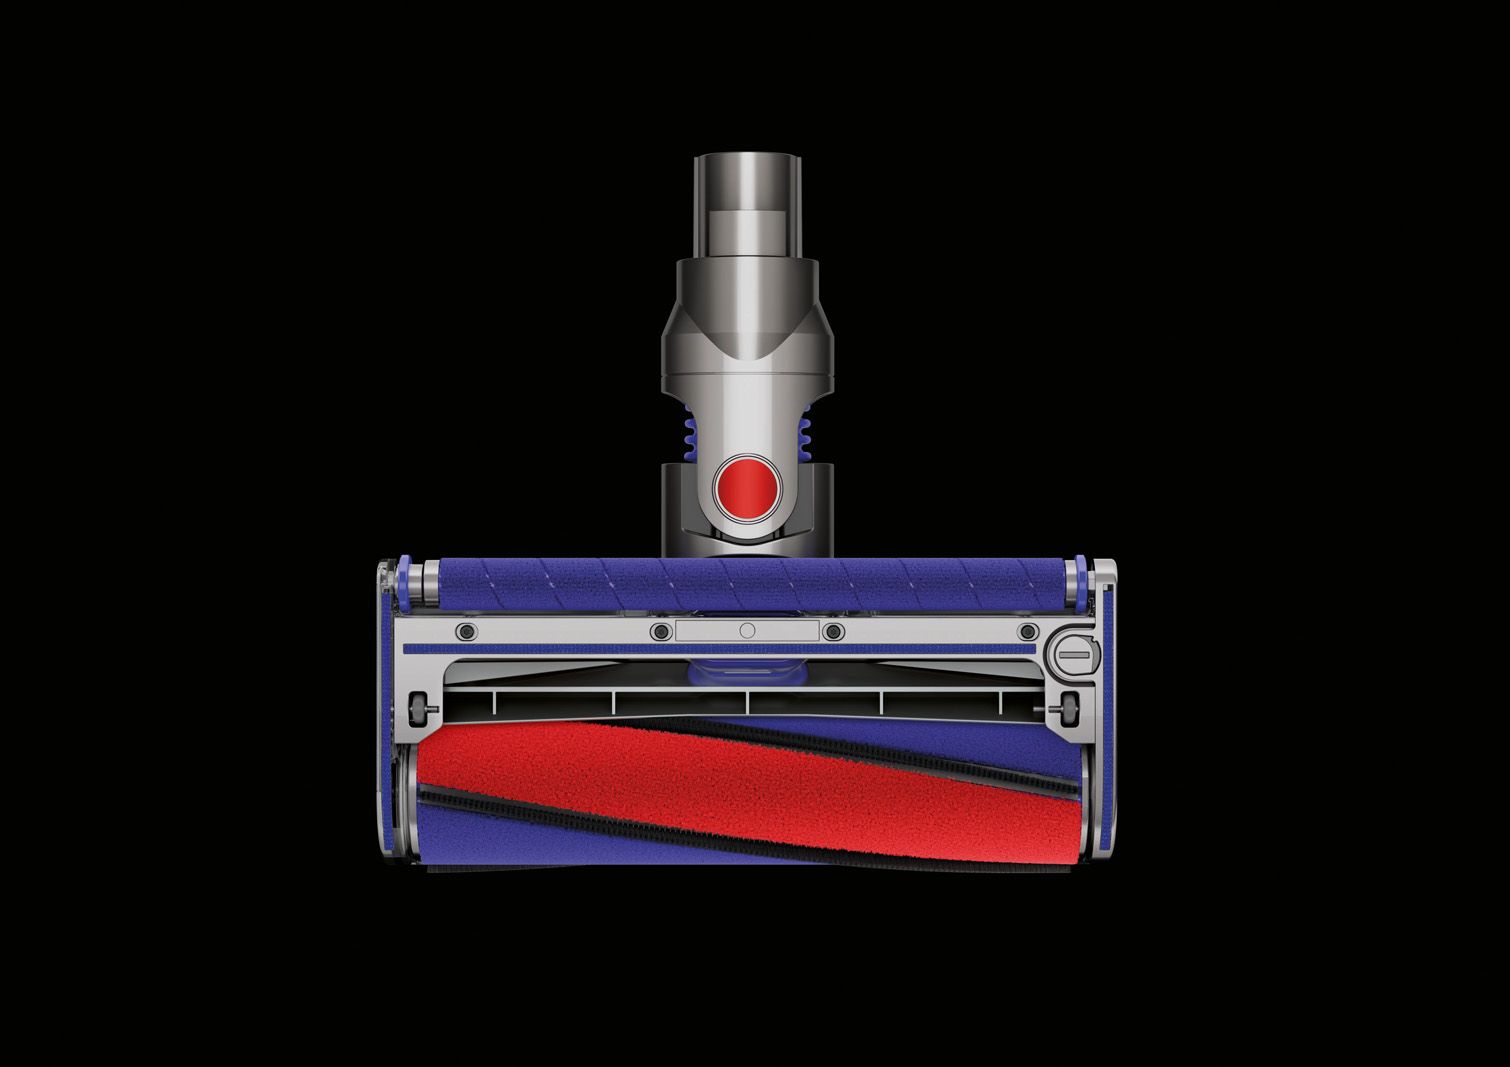 dyson v6 absolute and fluffy take cordless vacuums to an all new level image 6